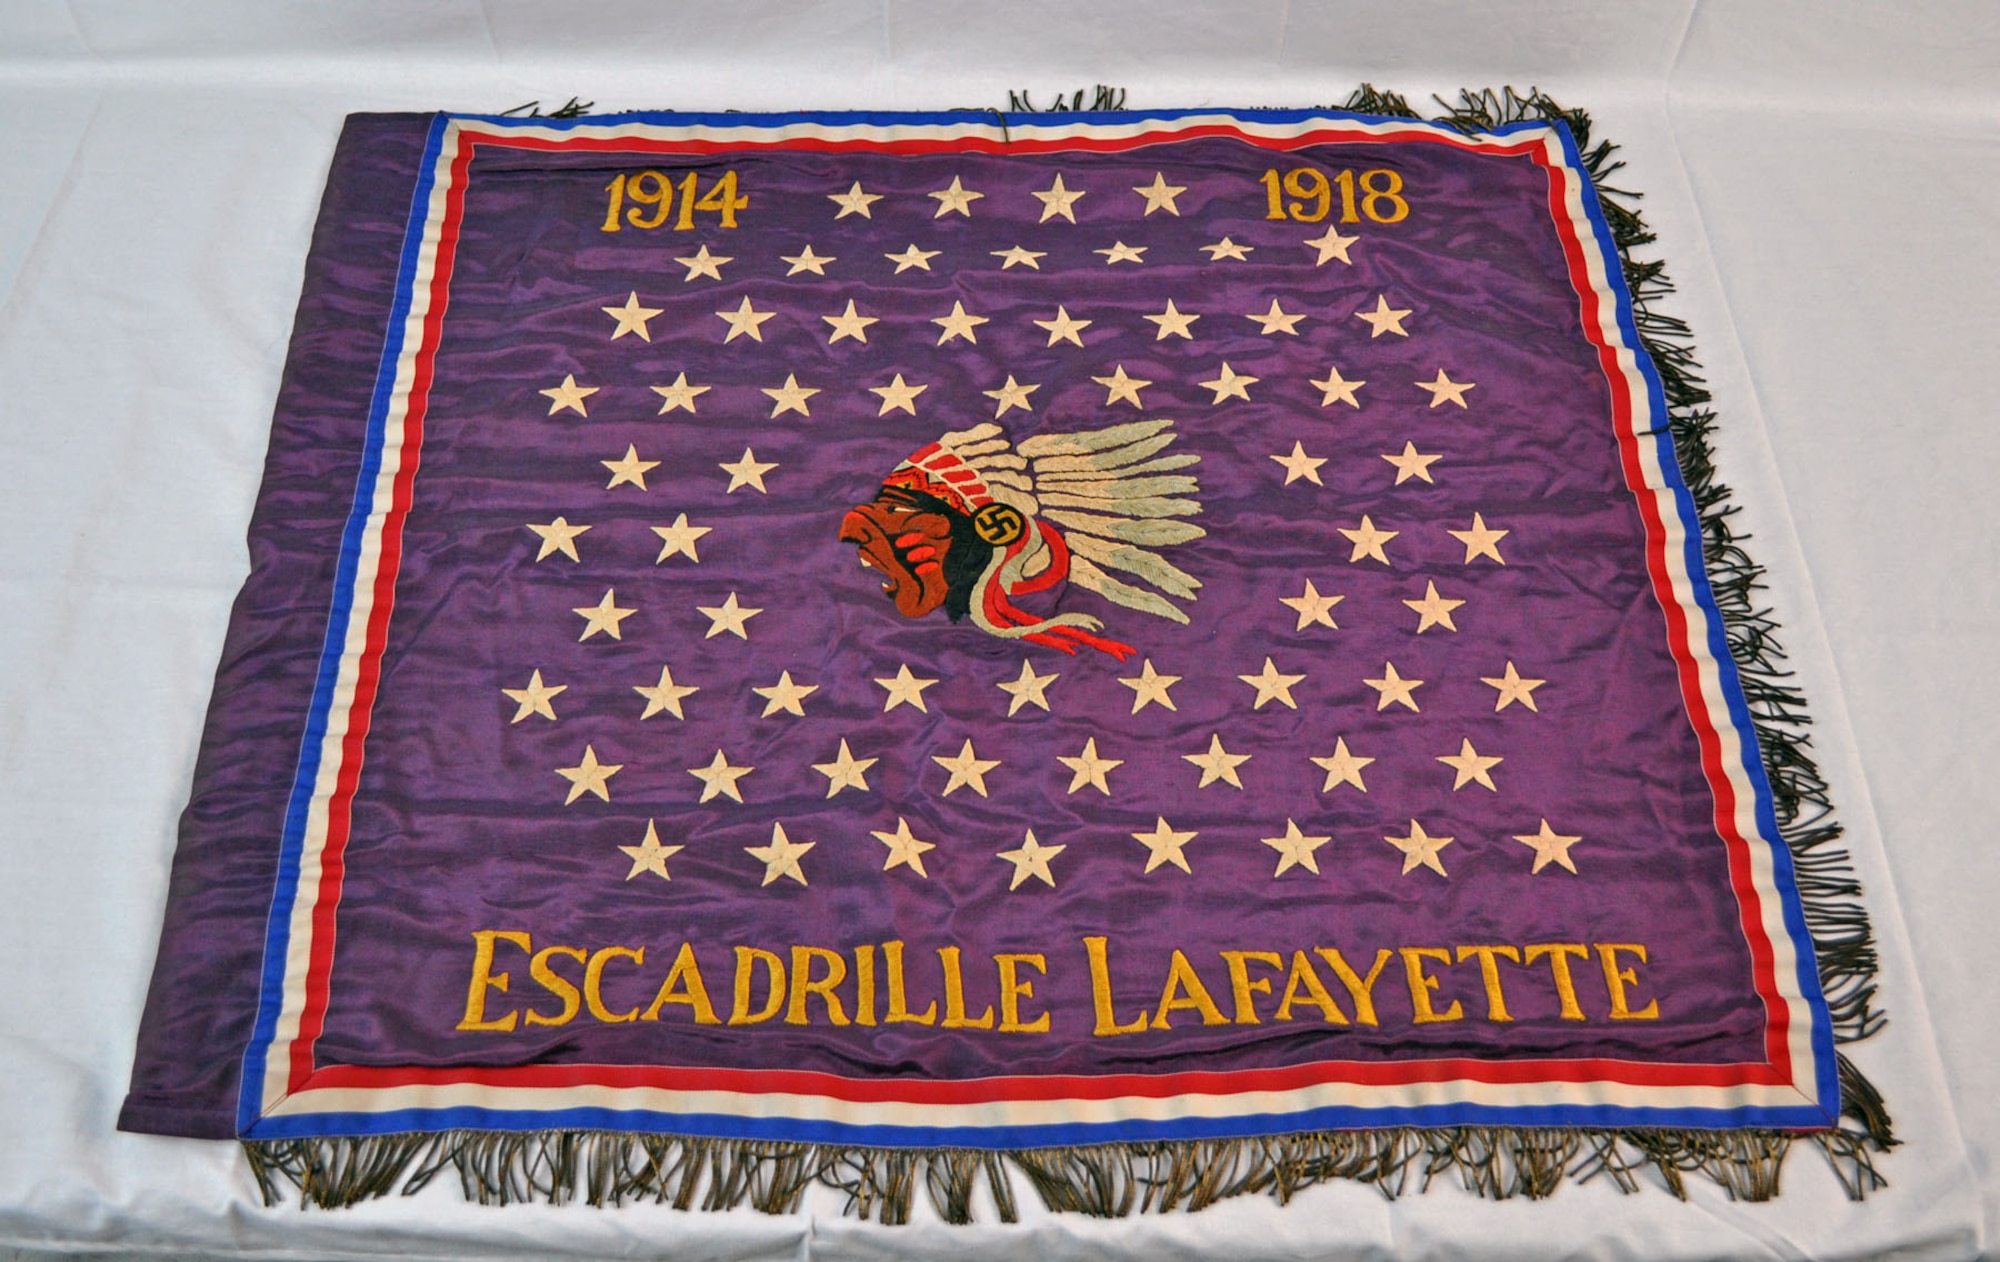 During World War I, many Americans citizens volunteered with the Lafayette Flying Corps to serve as volunteer pilots and observers in French combat squadrons.  In April 1916, the most famous American squadron, N124 "Escadrille Americaine," was established. Once America entered the war in 1917, many of the American volunteers were folded into the Army Air Service's 103rd Aero Squadron. (U.S. Air Force photo)